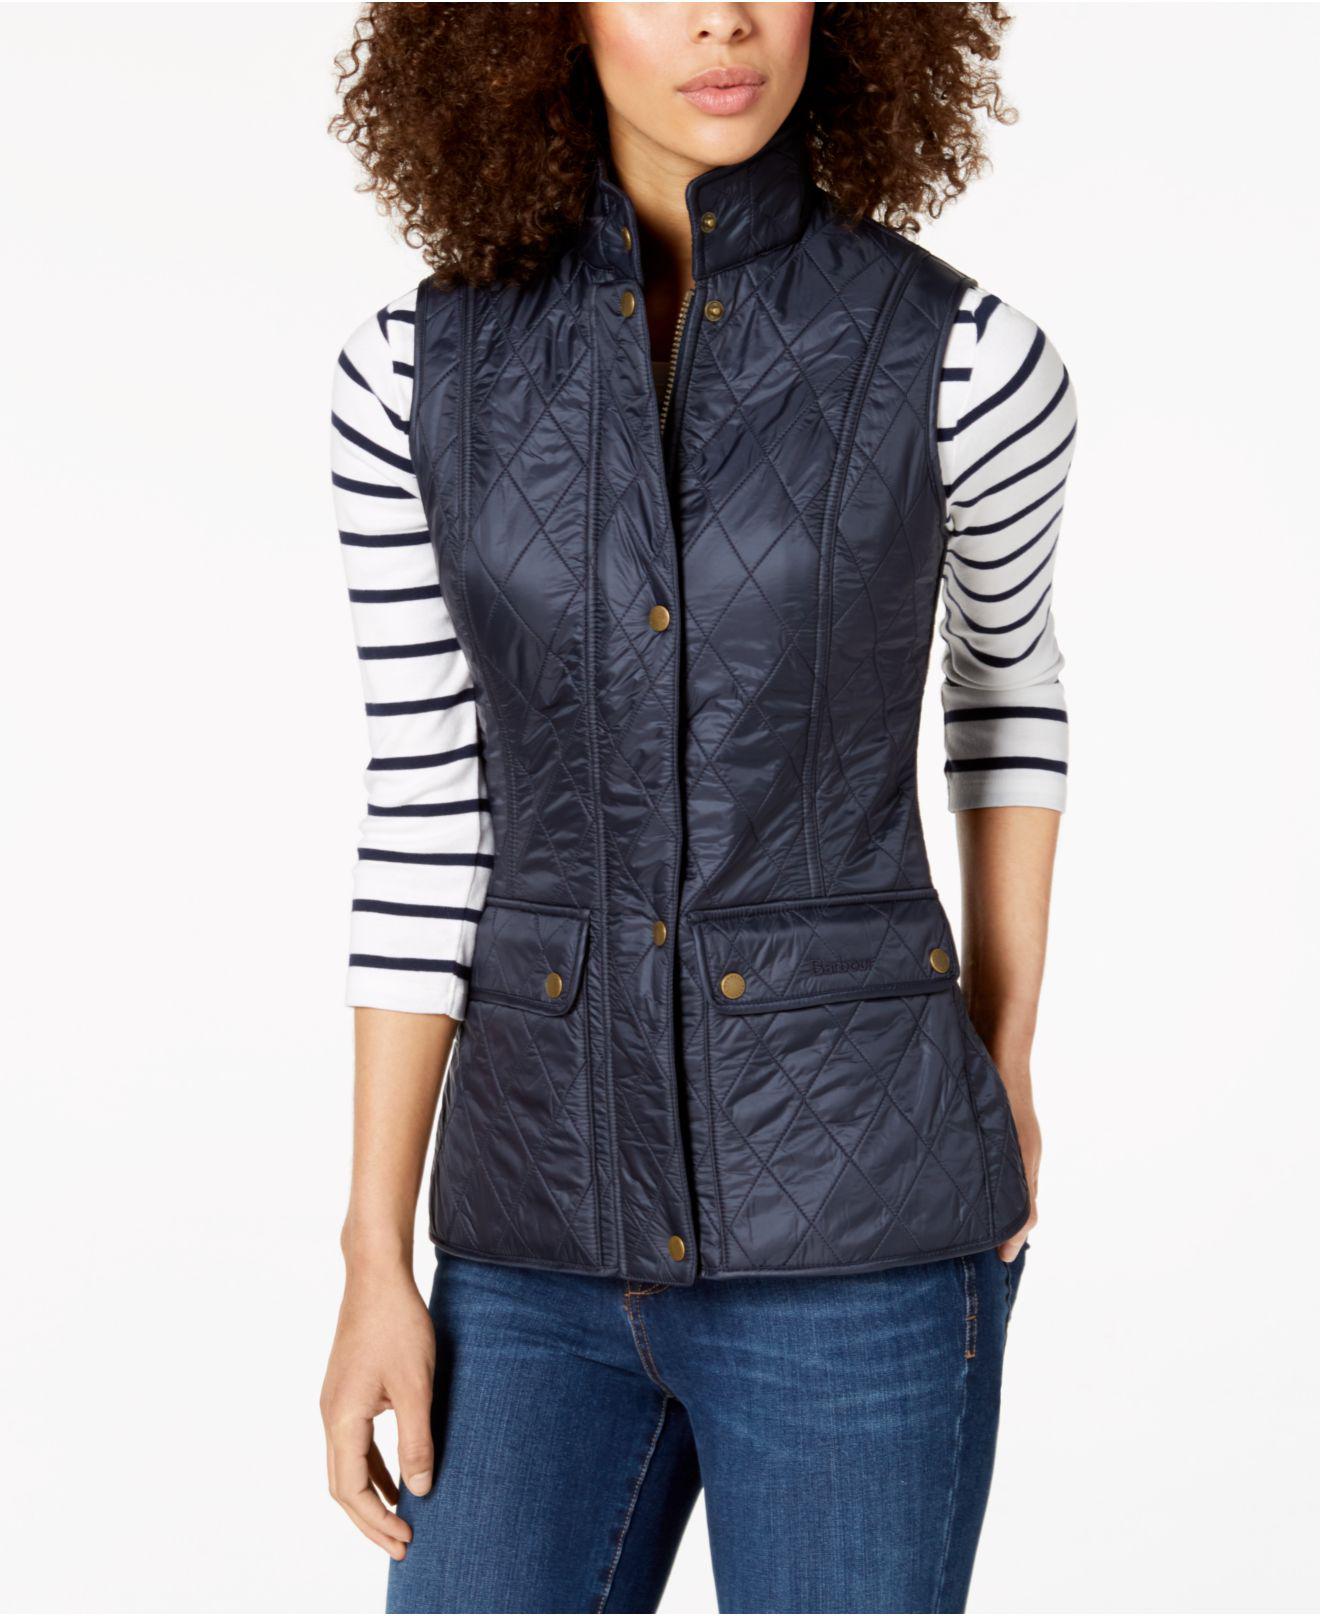 Barbour Quilted Fleece-lined Vest in Navy (Blue) - Lyst